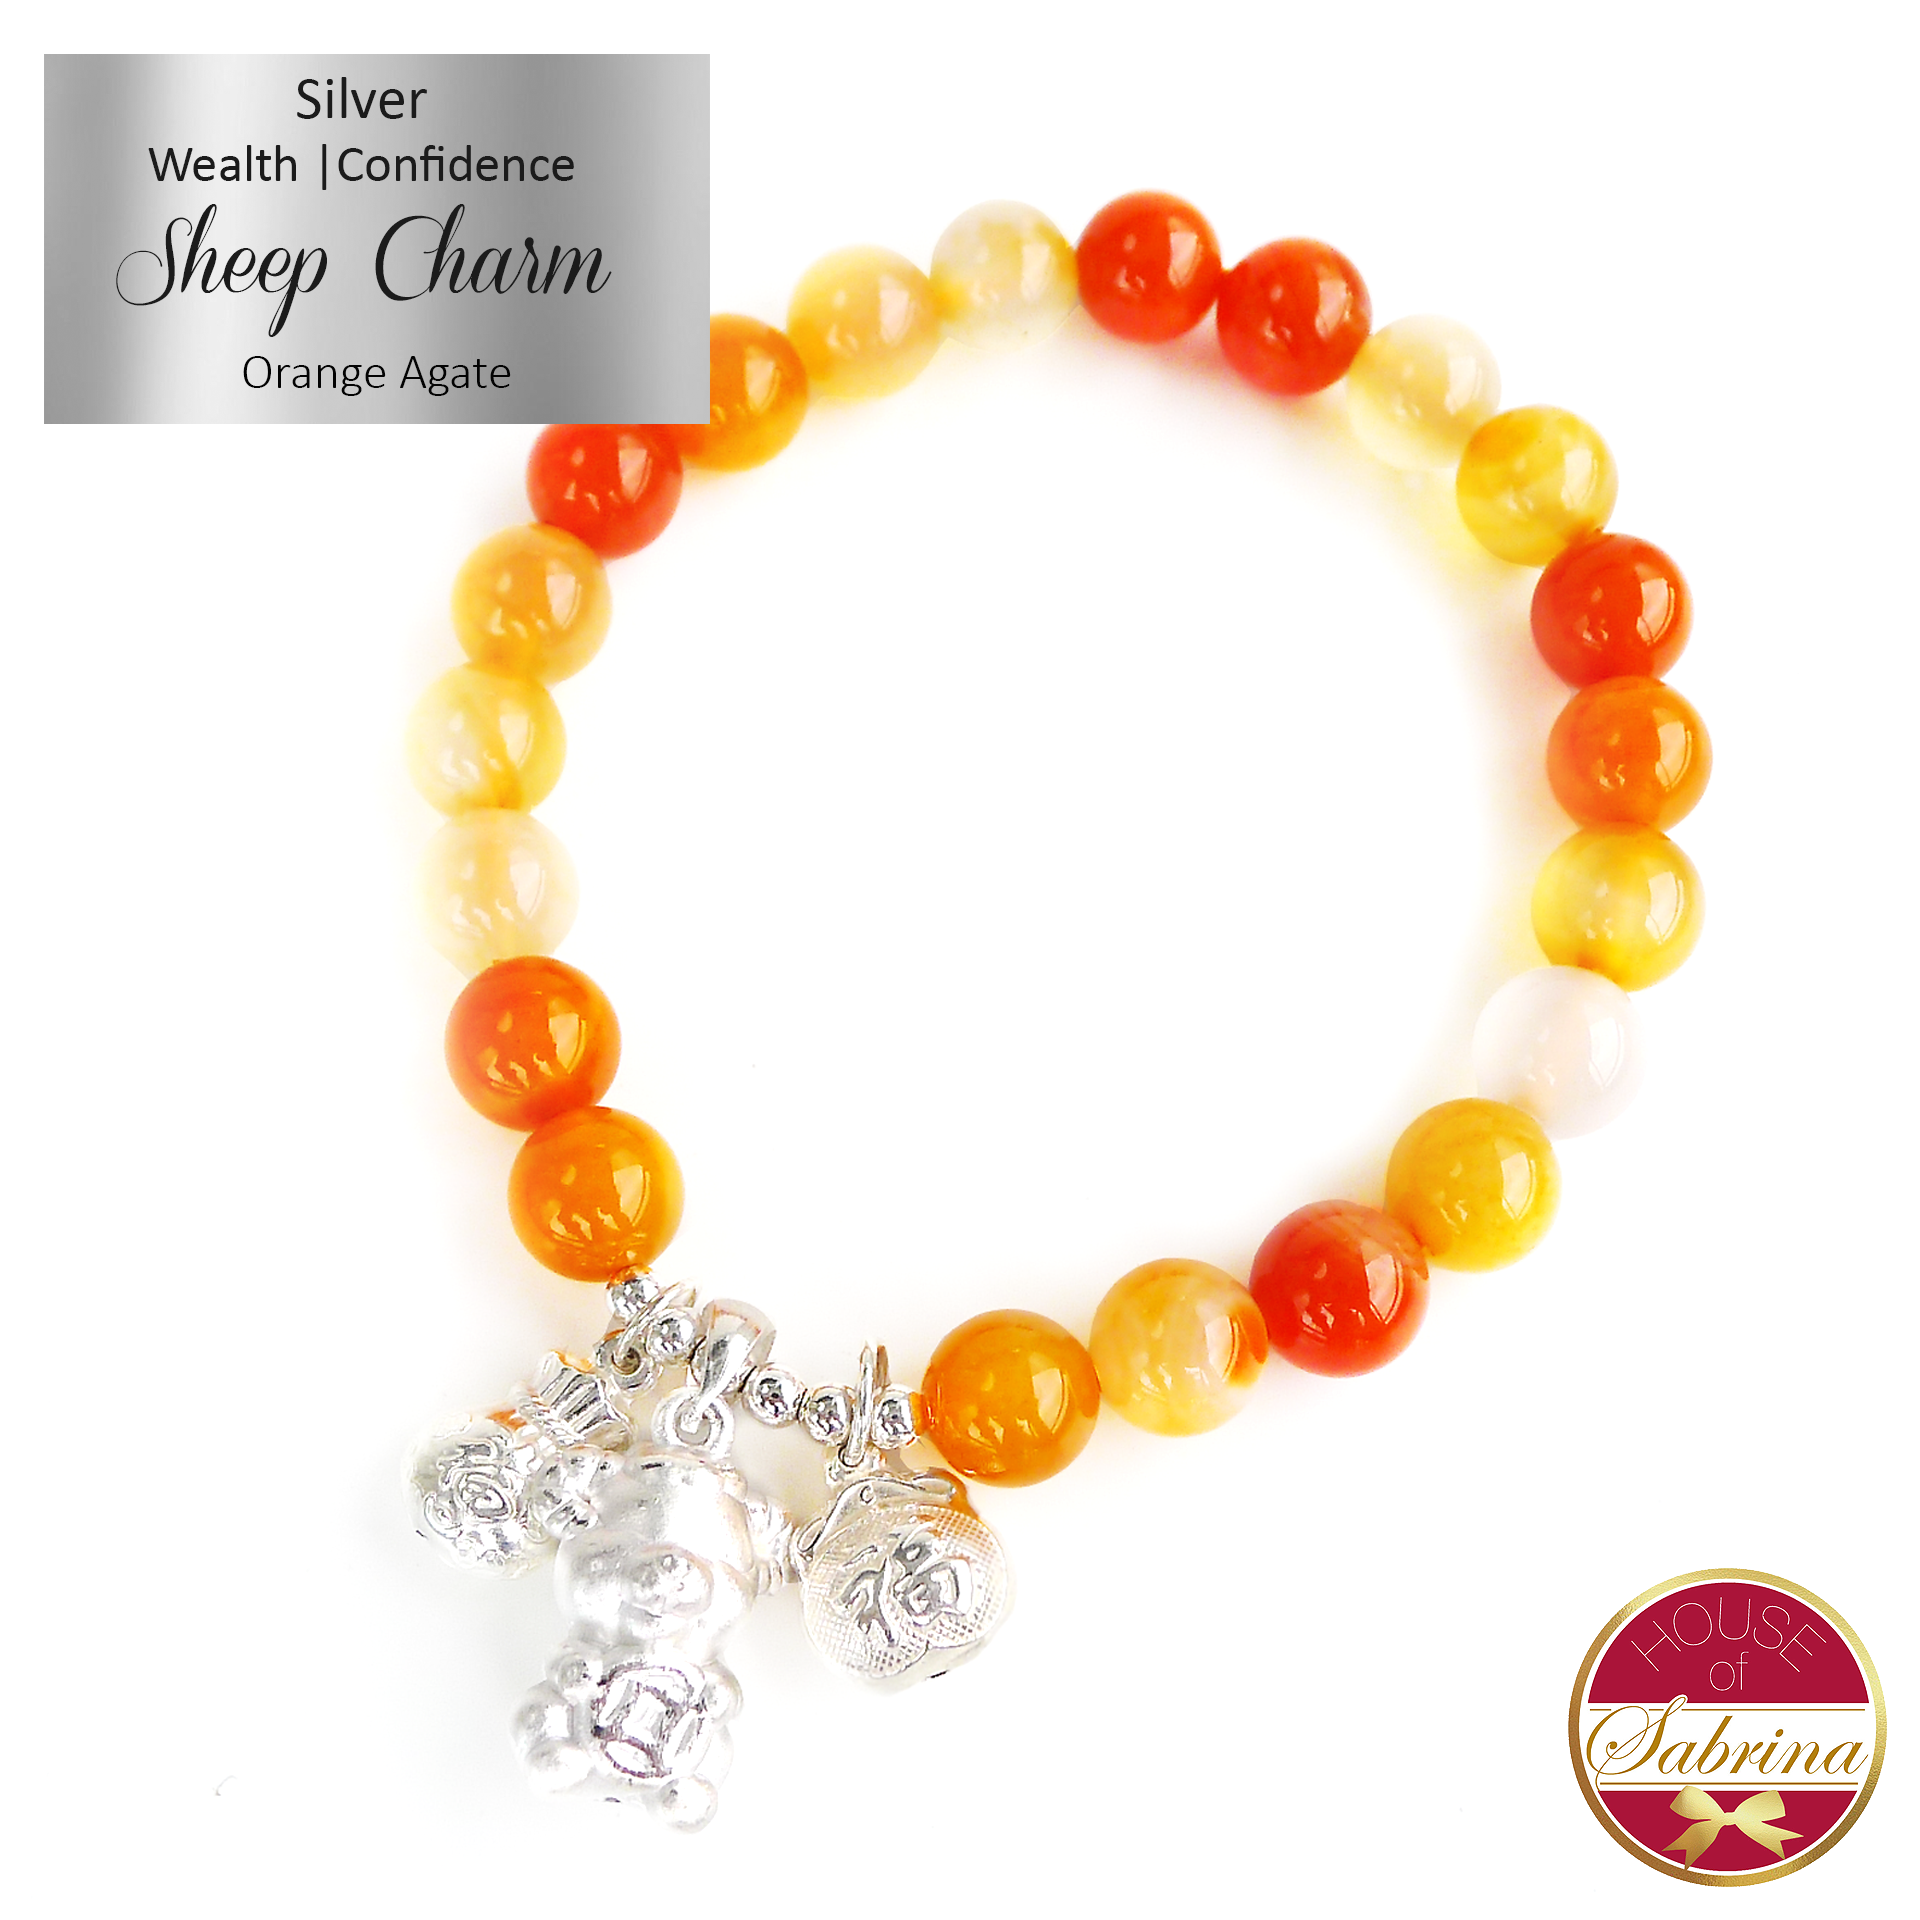 Silver Wealth and Confidence Charm for Sheep on Orange Agate Gemstone Bracelet